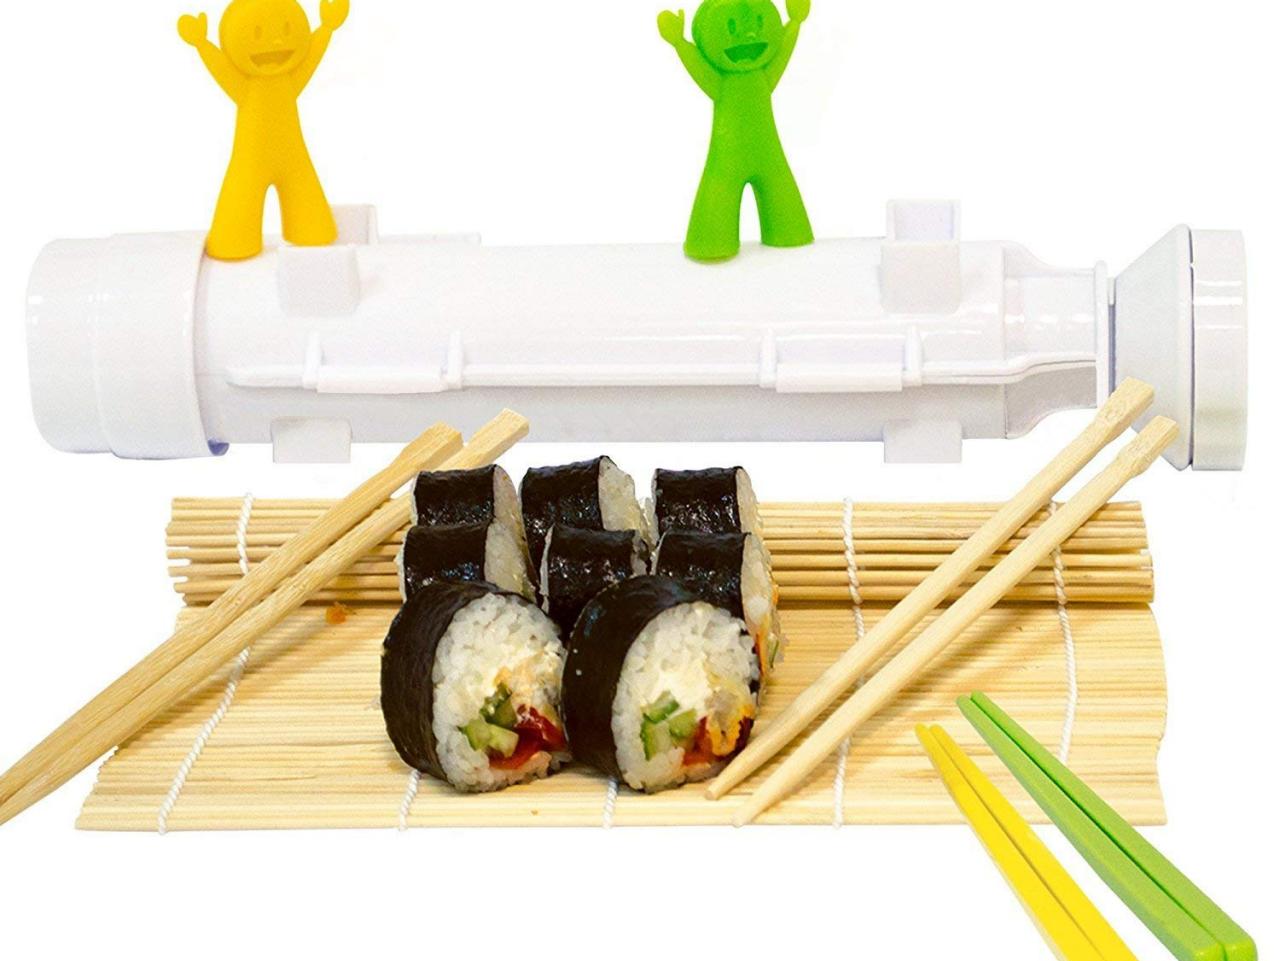 https://food.fnr.sndimg.com/content/dam/images/food/products/2018/12/11/rx_sushi-mat-and-bamboo-chopsticks-with-silicone-helper-set.jpeg.rend.hgtvcom.1280.960.suffix/1544561698865.jpeg